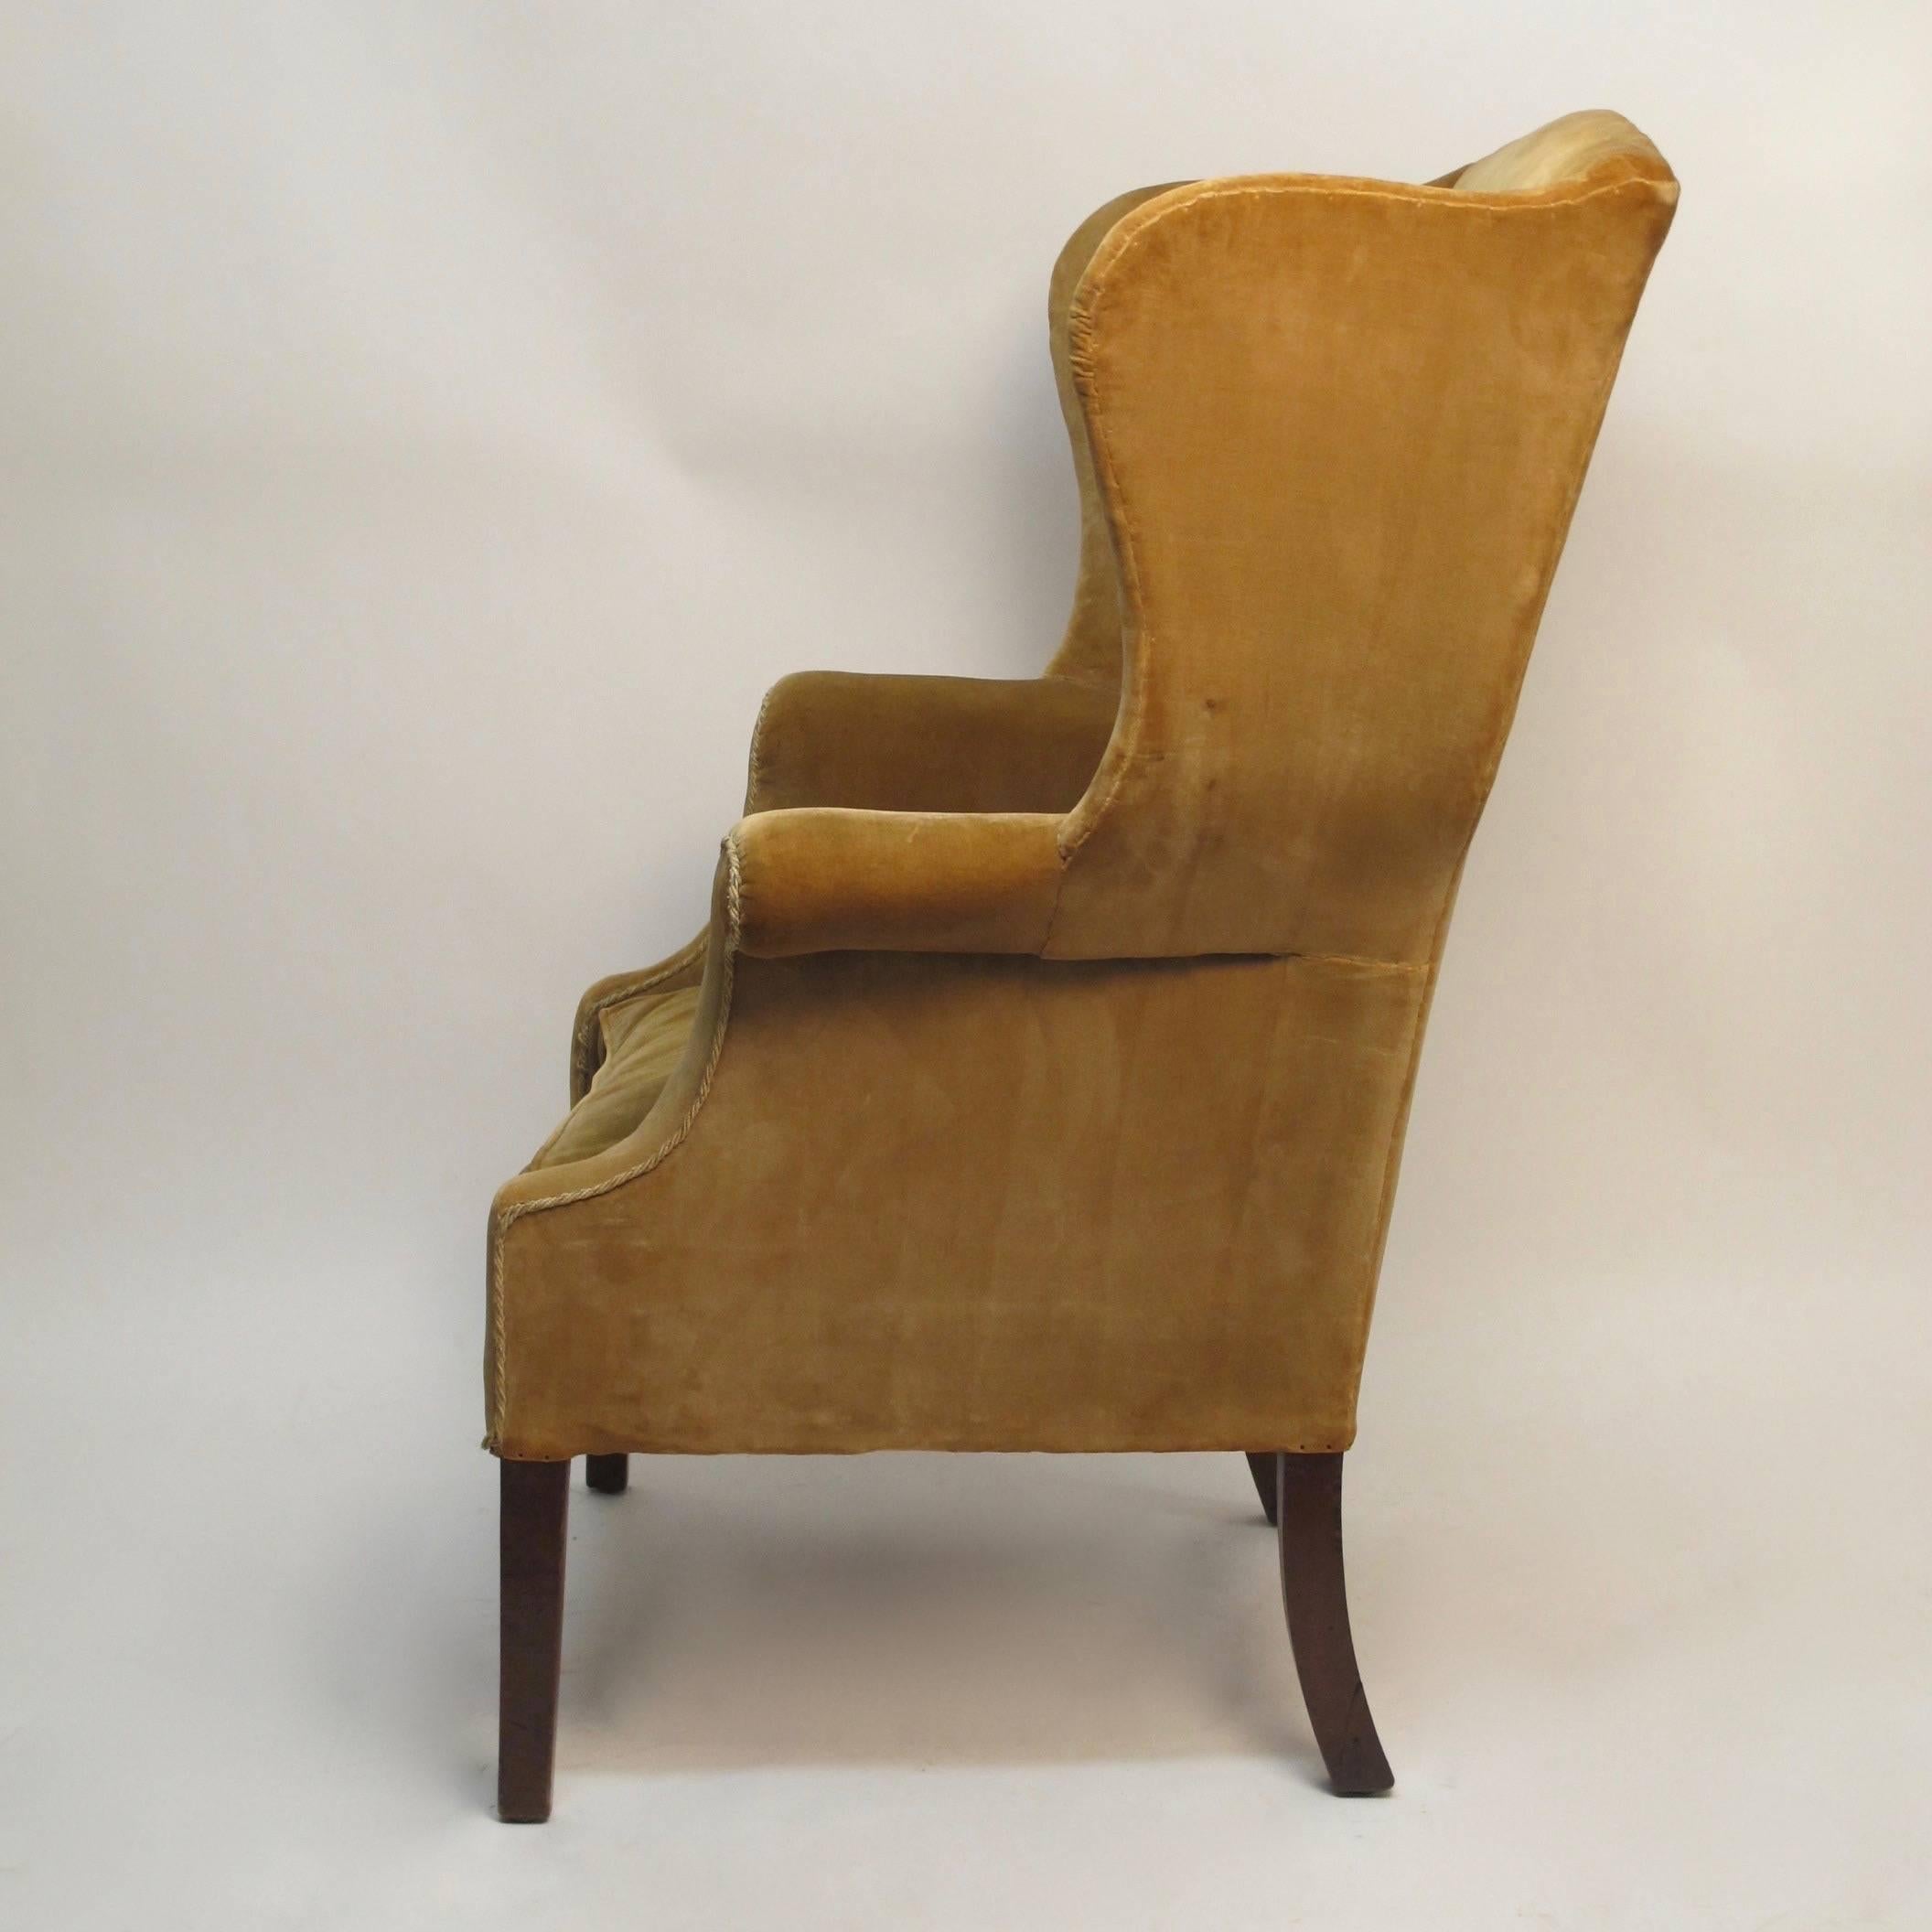 18th Century and Earlier 18th Century American Wingback Chair